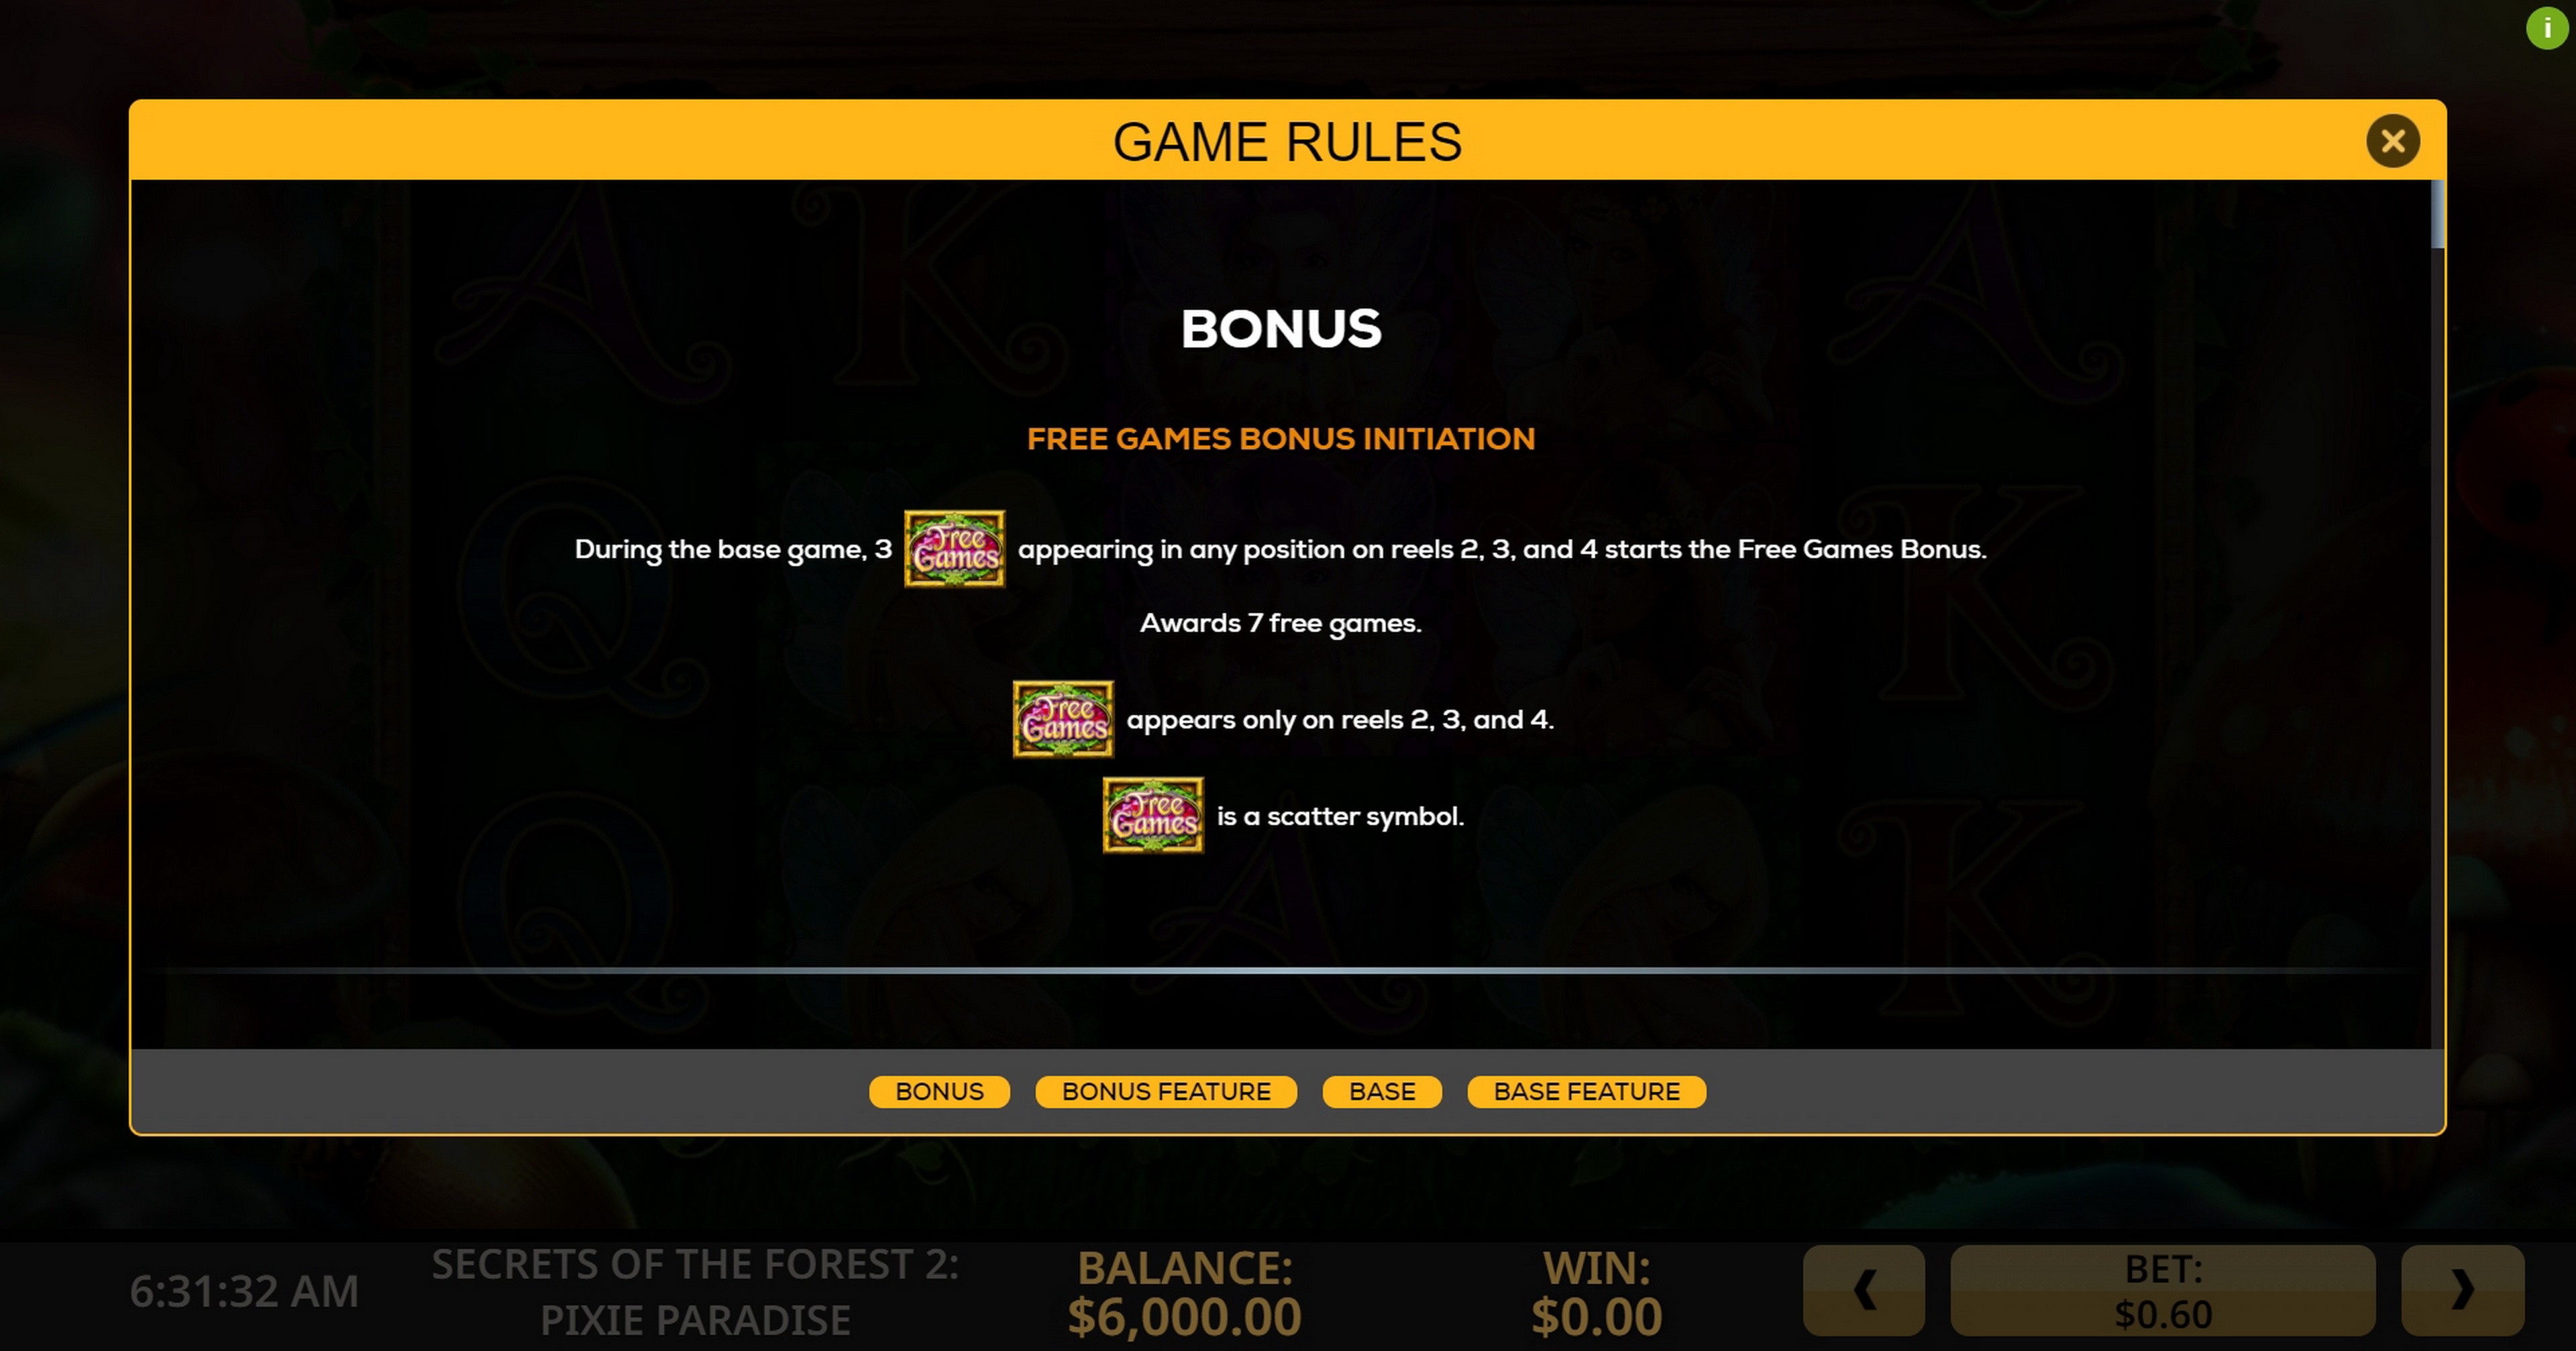 Info of Secrets of the Forest 2 Pixie Paradise Slot Game by High 5 Games